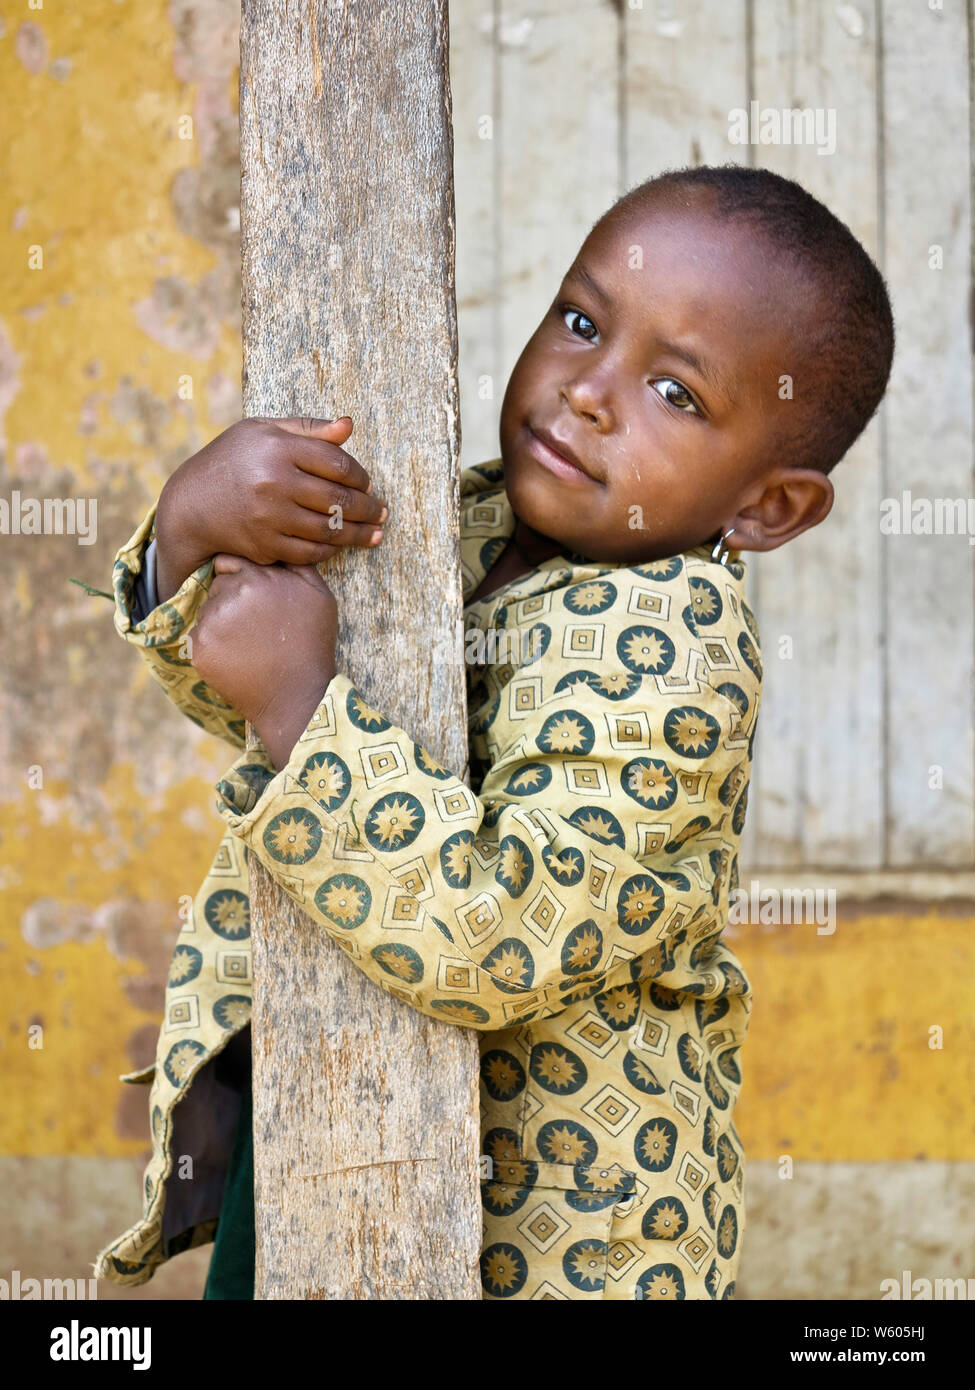 Tanznia, Africa, Children femal and male playing and being happy. Very poor but clean and smiling. Very healthy atractive young people. Stock Photo